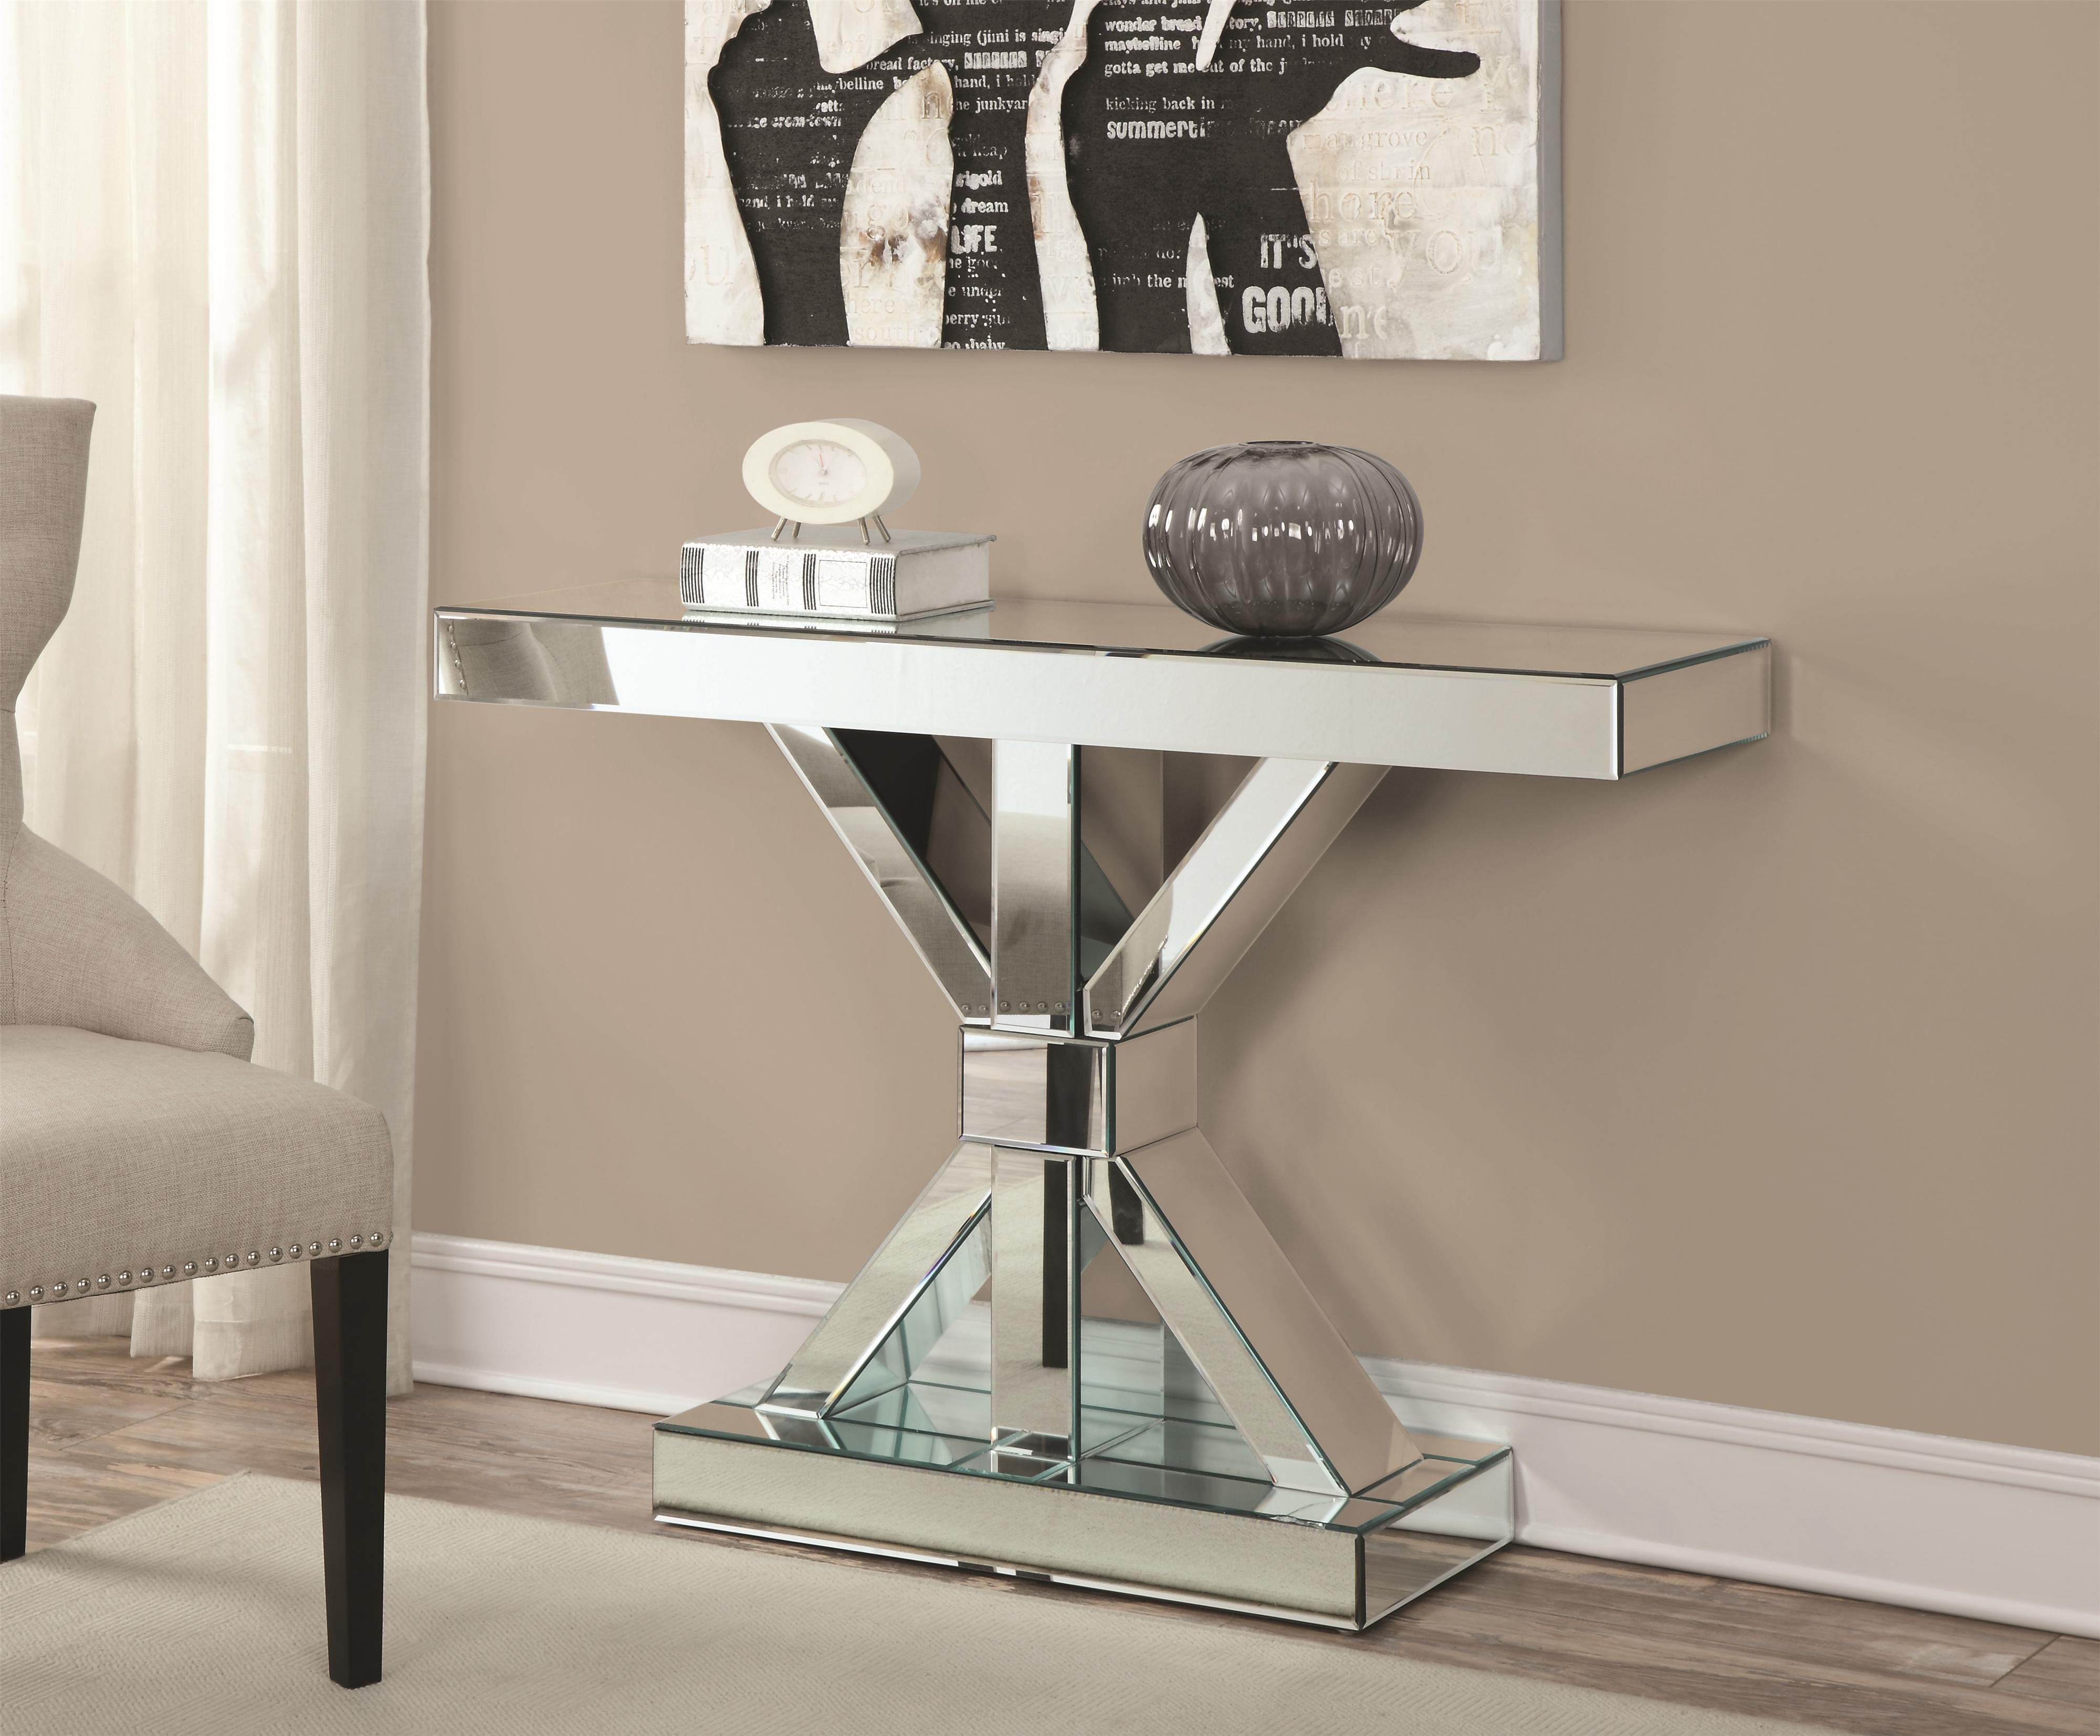 xmas dinner table ideas the fantastic unbelievable threshold mirrored accent with decorating bobreuterstl drawer ashley end usb lack bedside office floor lamps southwestern